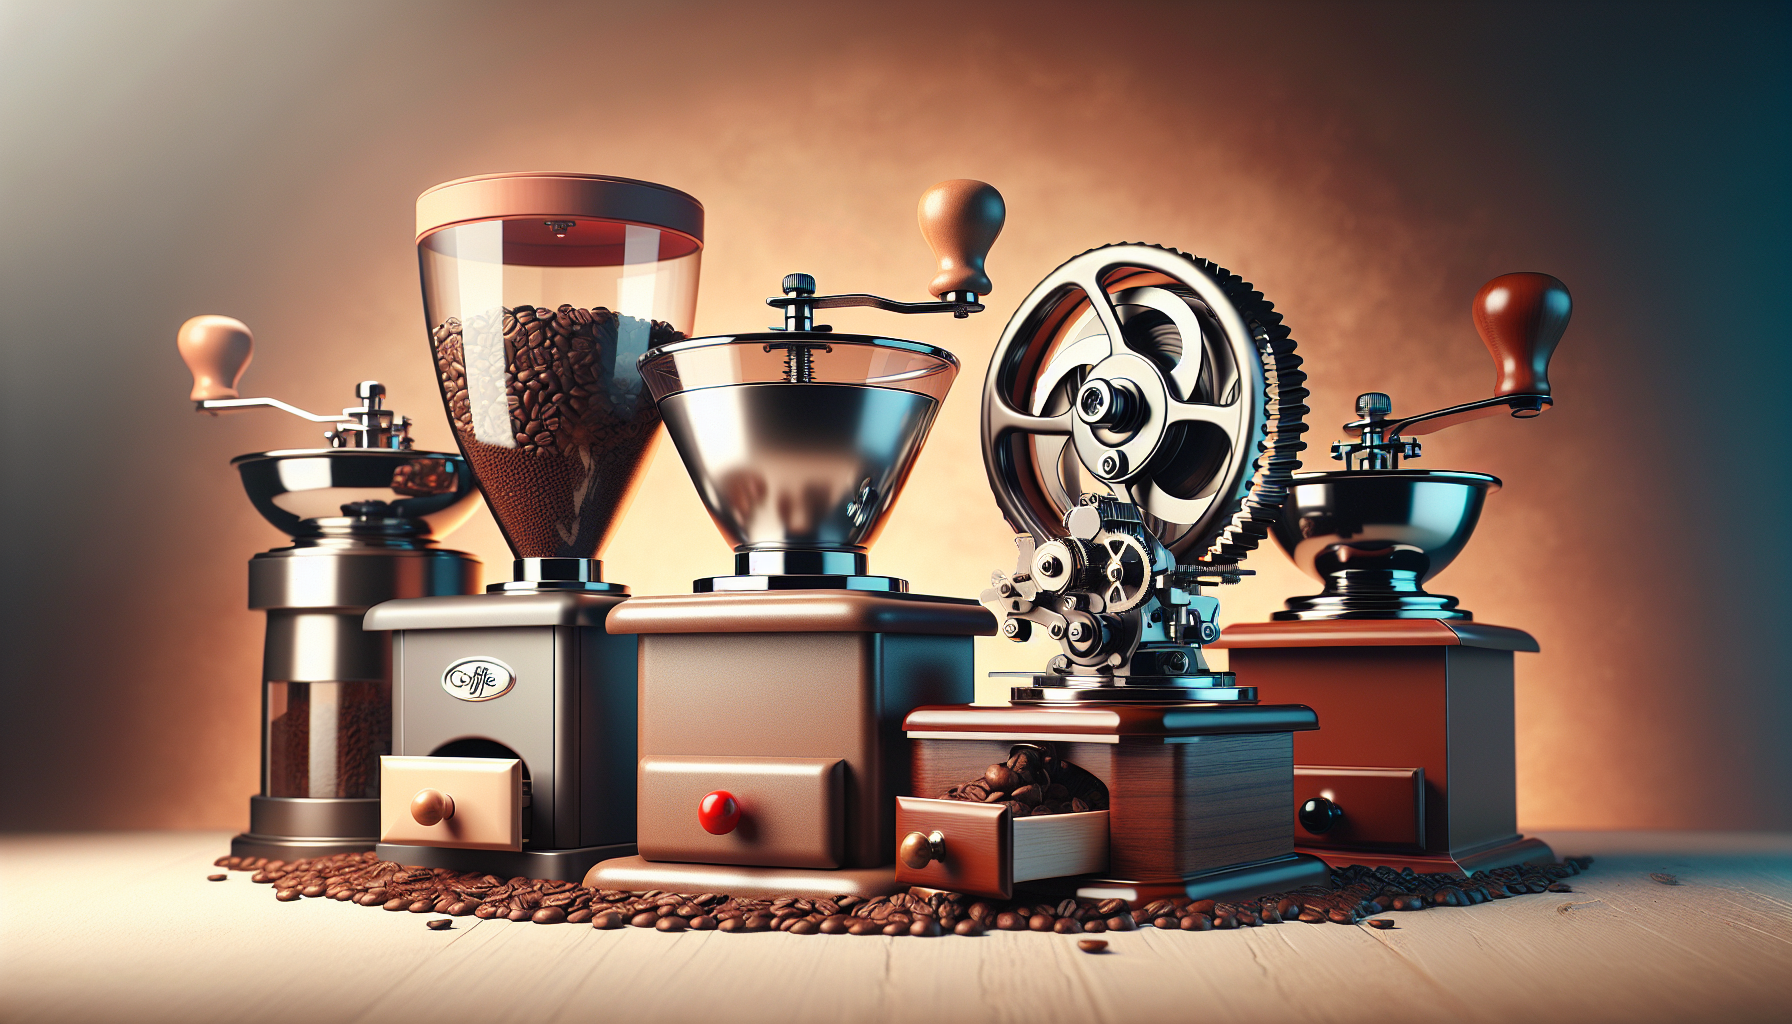 Illustration of different types of coffee grinders